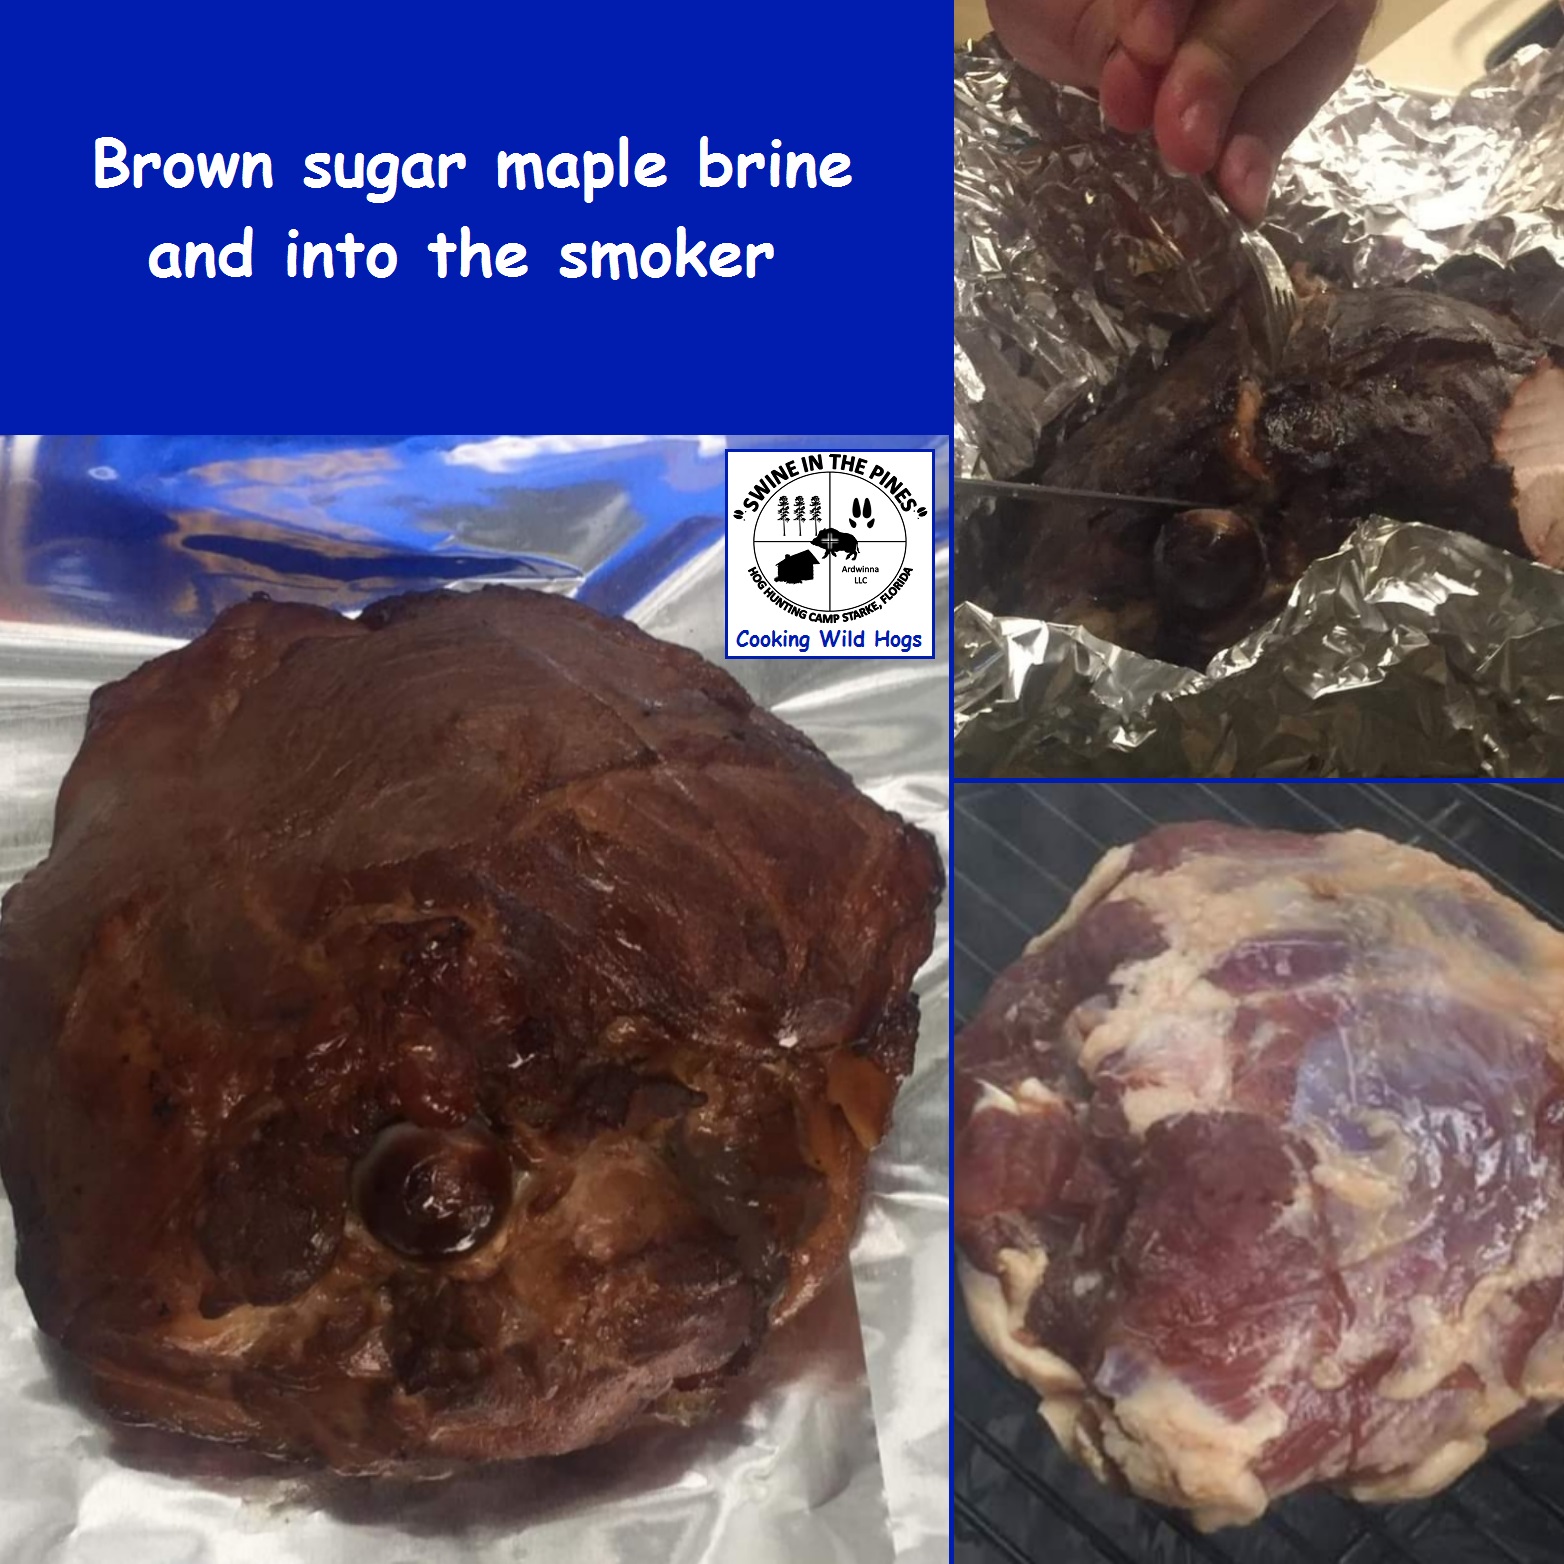 Wild Hog from the Pines - Brown sugar maple brine and into the smoker